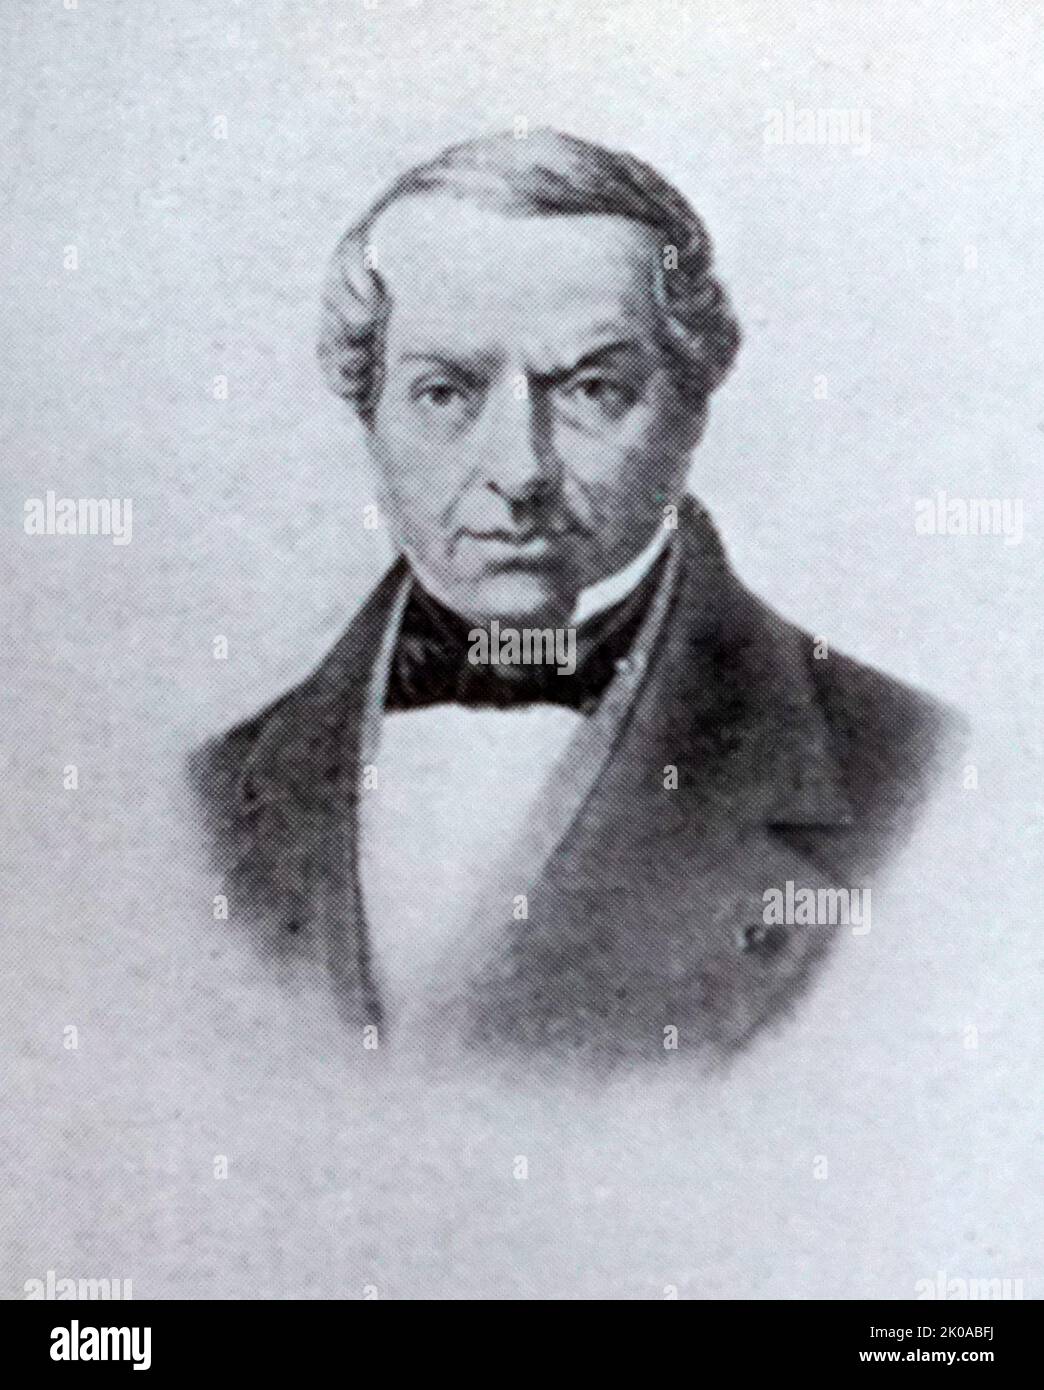 Baron James Mayer de Rothschild, Baron de Rothschild (born Jakob Mayer Rothschild; 15 May 1792 - 15 November 1868) was a German-French banker and the founder of the French branch of the Rothschild family Stock Photo